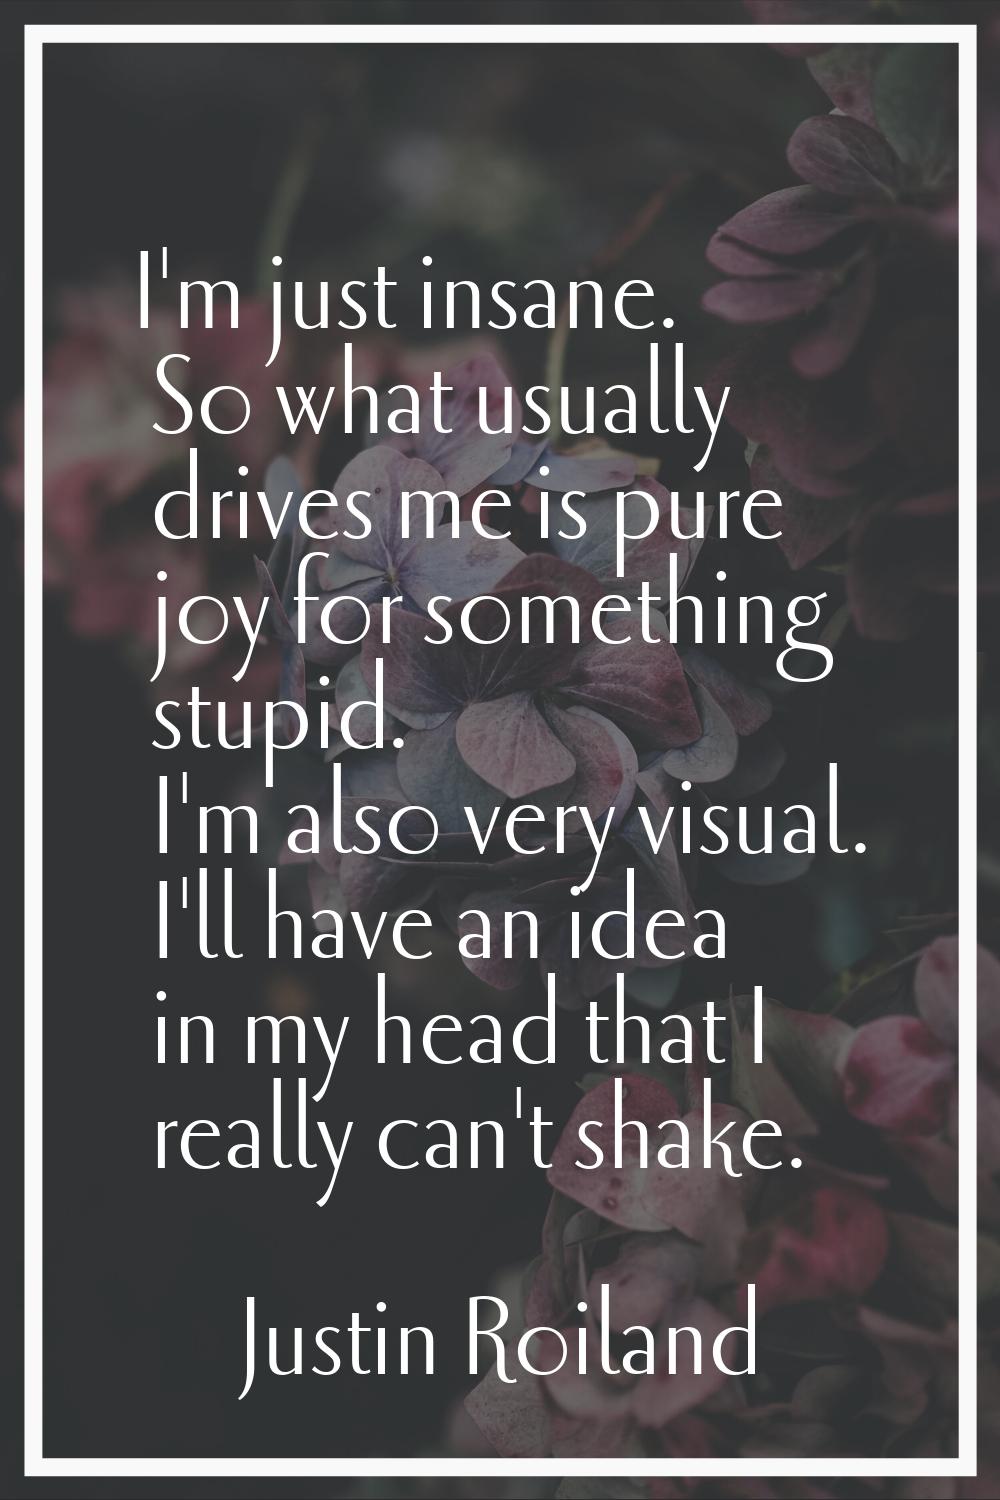 I'm just insane. So what usually drives me is pure joy for something stupid. I'm also very visual. 